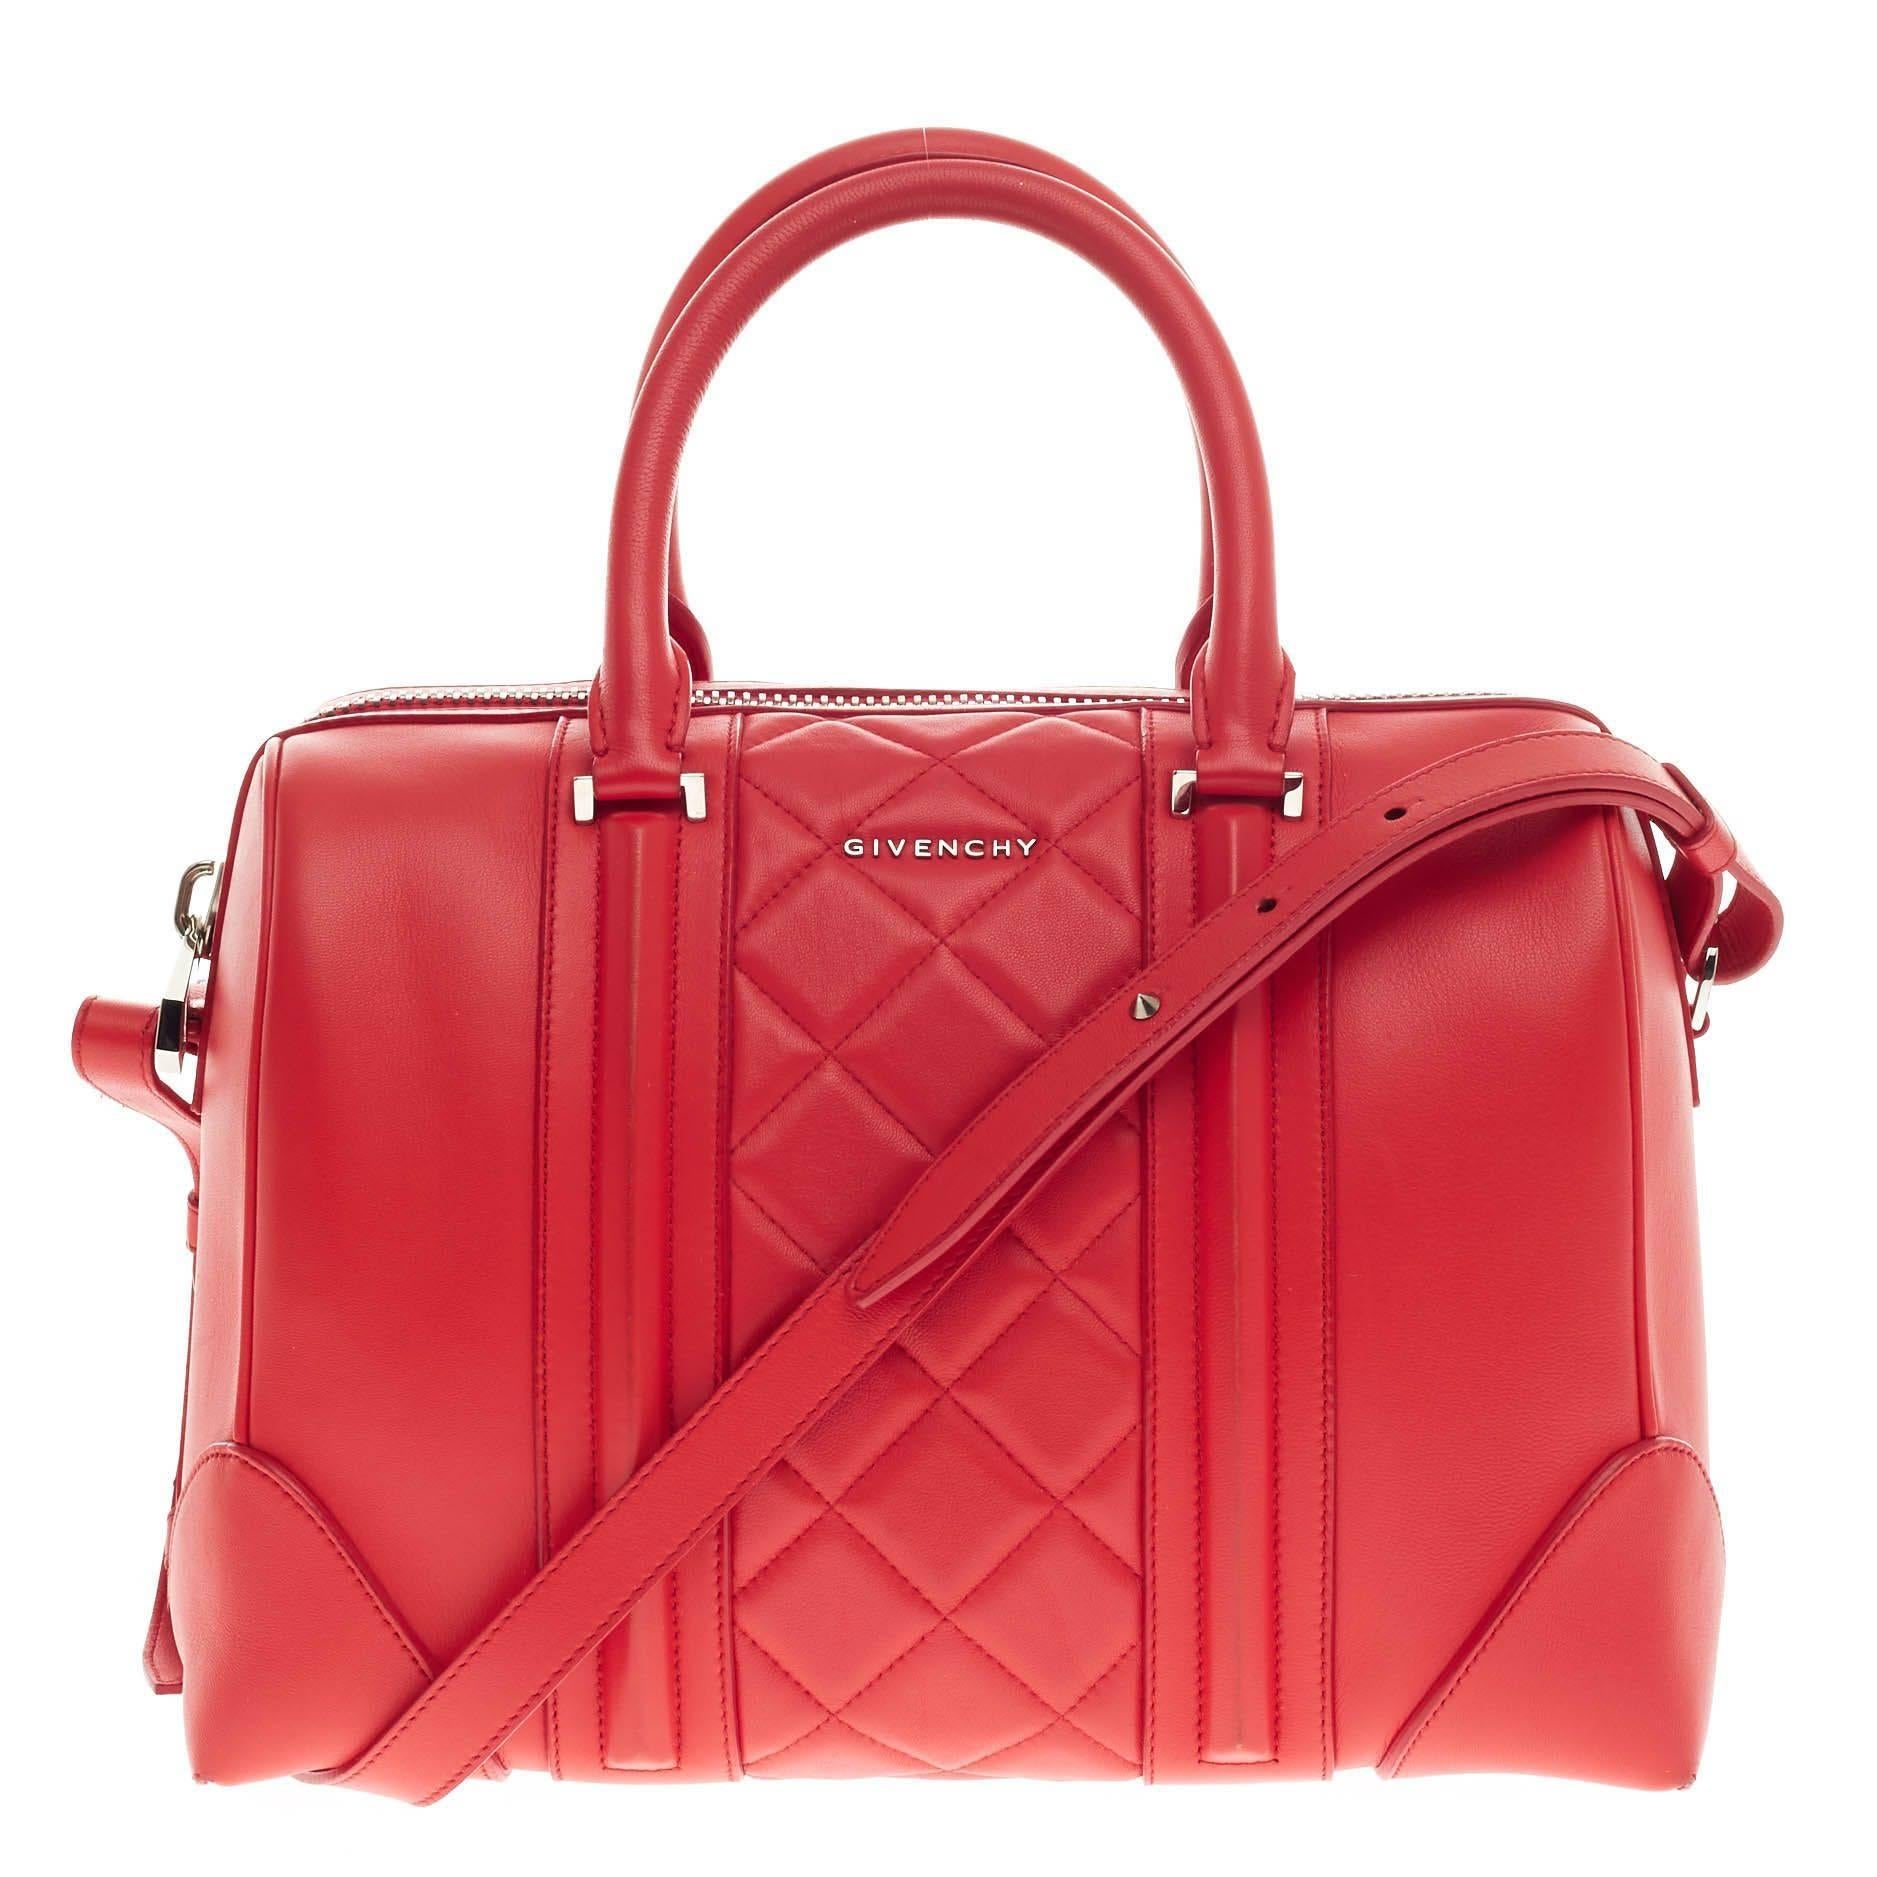 Givenchy Lucrezia Duffle Bag Quilted Leather Medium